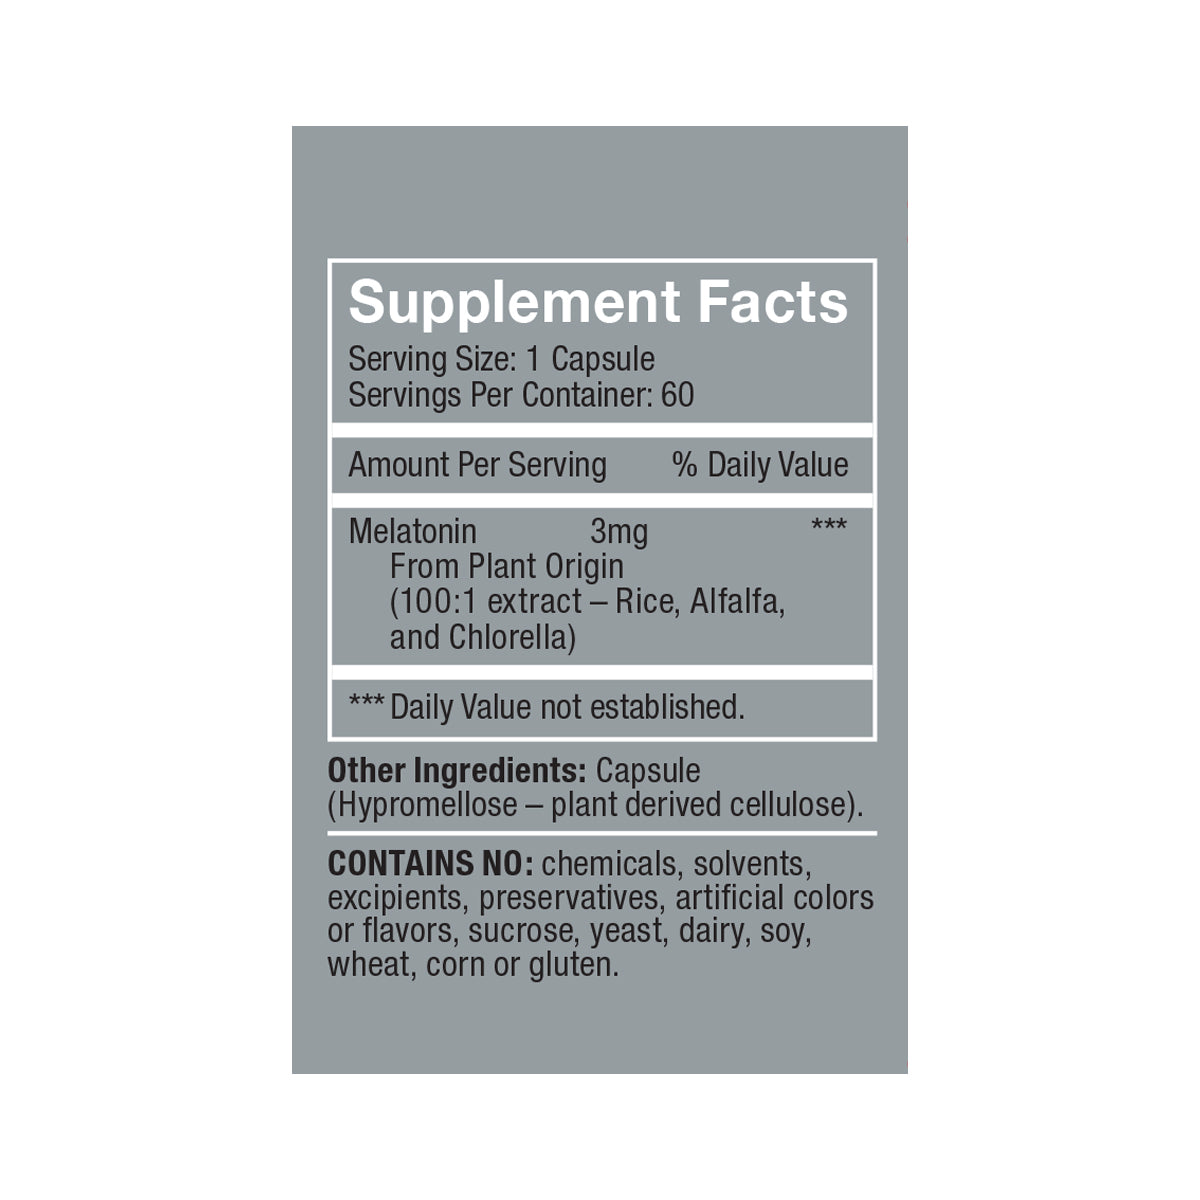 Herbatonin 3mg<br>2-Pack side panel product box supplement facts, white/black text on dark gray background: Serving size 1 capsule, servings per container 60, melatonin 3mg from plant origin (100:1 extract rice, alfalfa, and chlorella), other ingredient is capsule (hypromellose-plant derived cellulose), contains no chemicals, solvents, excipients, preservatives, artificial colors or flavors, sucrose, yeast, dairy, soy, wheat, corn or gluten